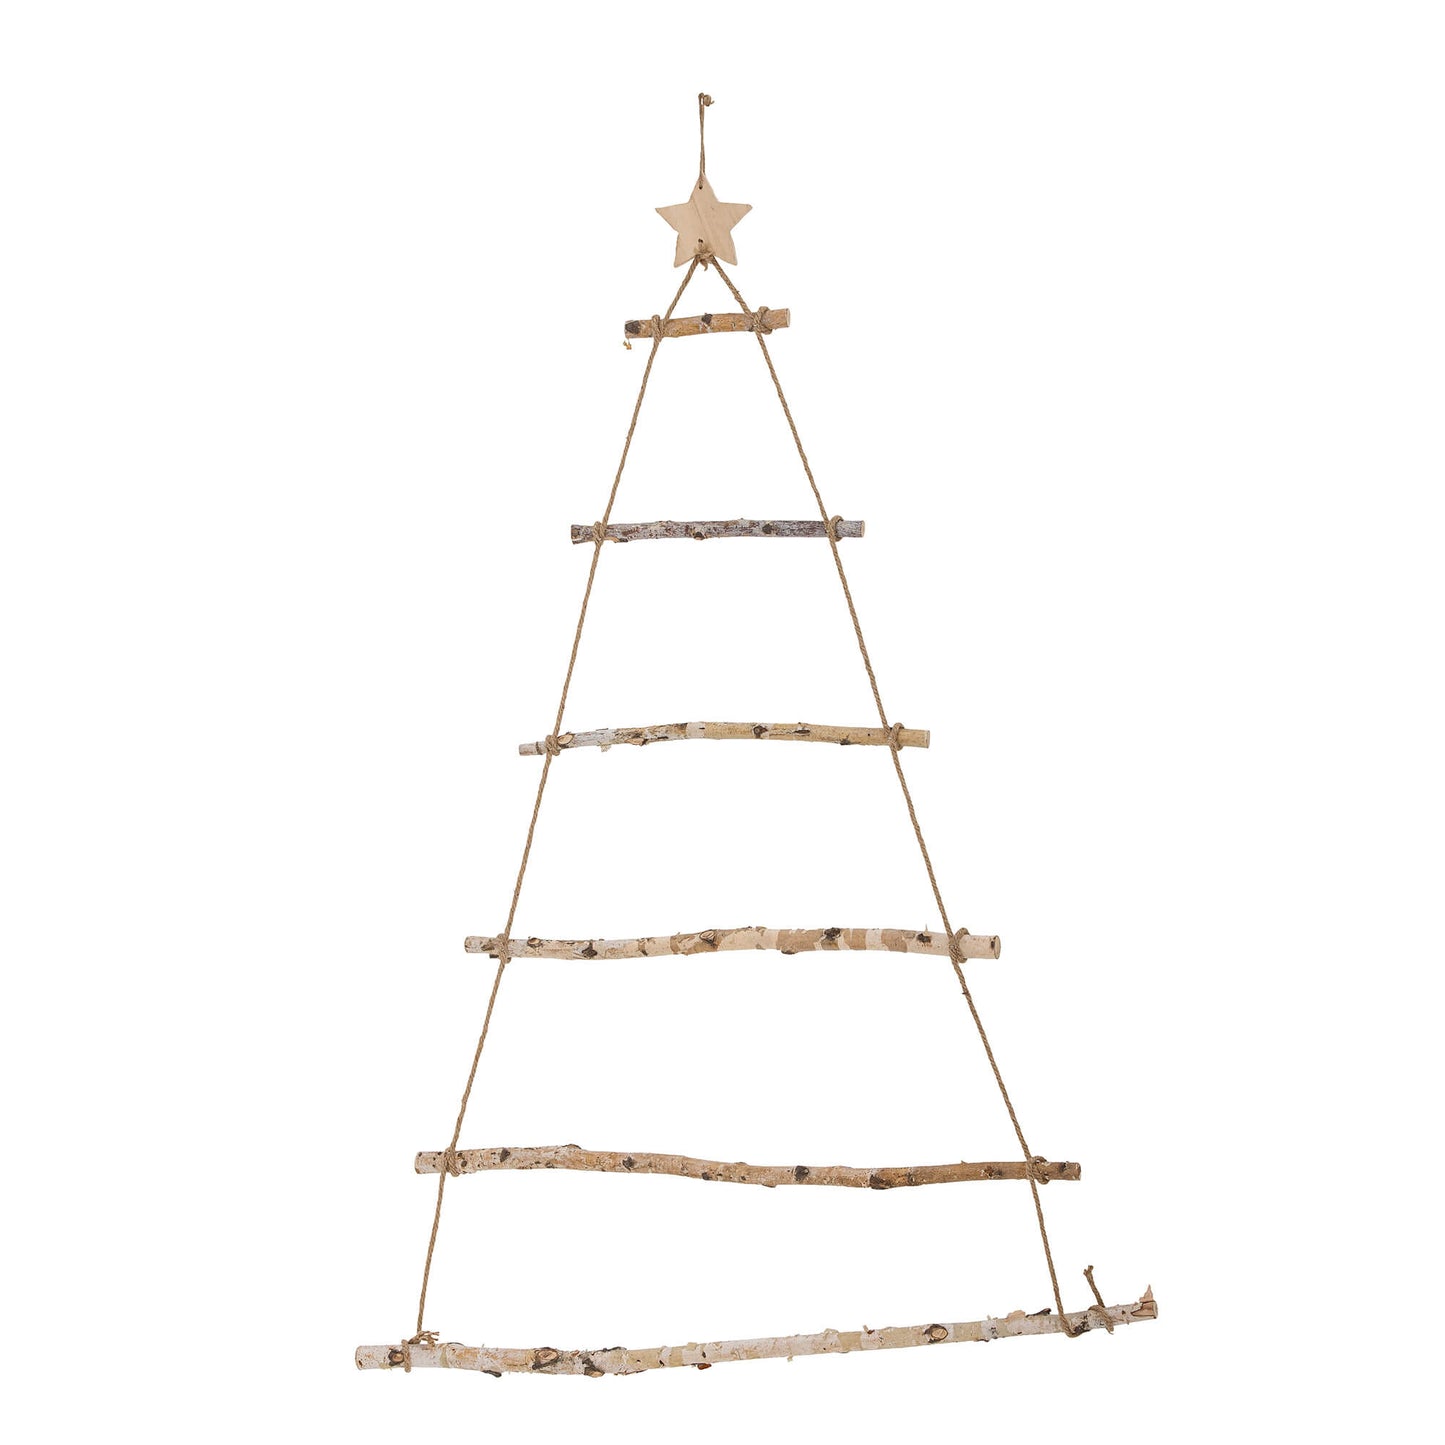 Front View of Majda Deco Tree: A Christmas tree in Nordic design made of jute string and birch branches by Bloomingville.